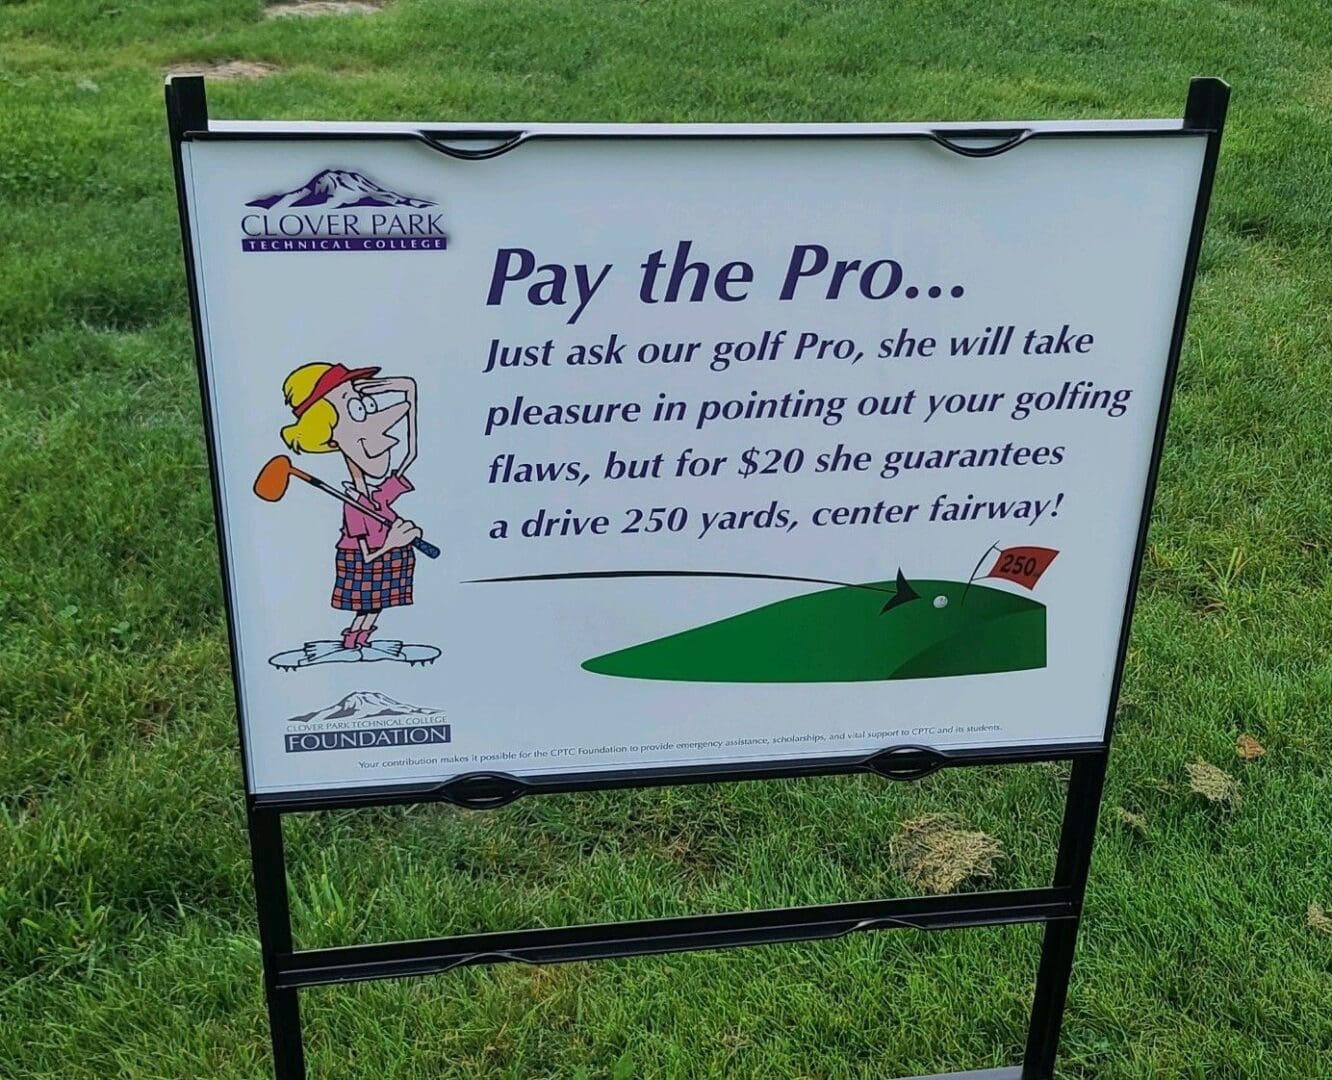 A sign for Pay the Pro